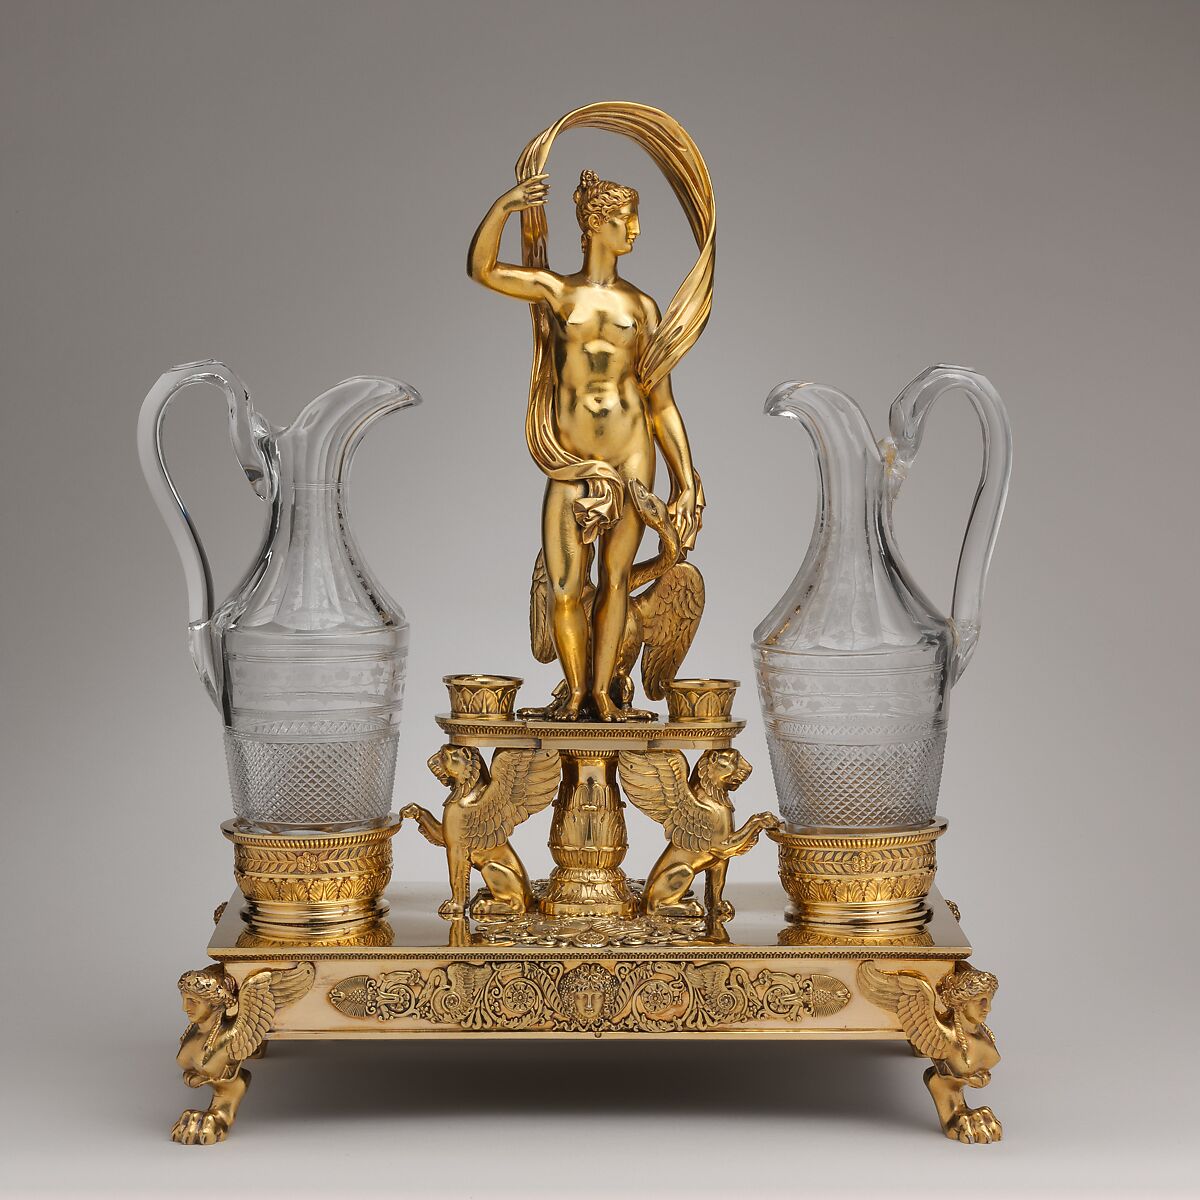 Cruet frame (one of a pair), Jean-Baptiste-Claude Odiot  French, Silver gilt, glass, French, Paris